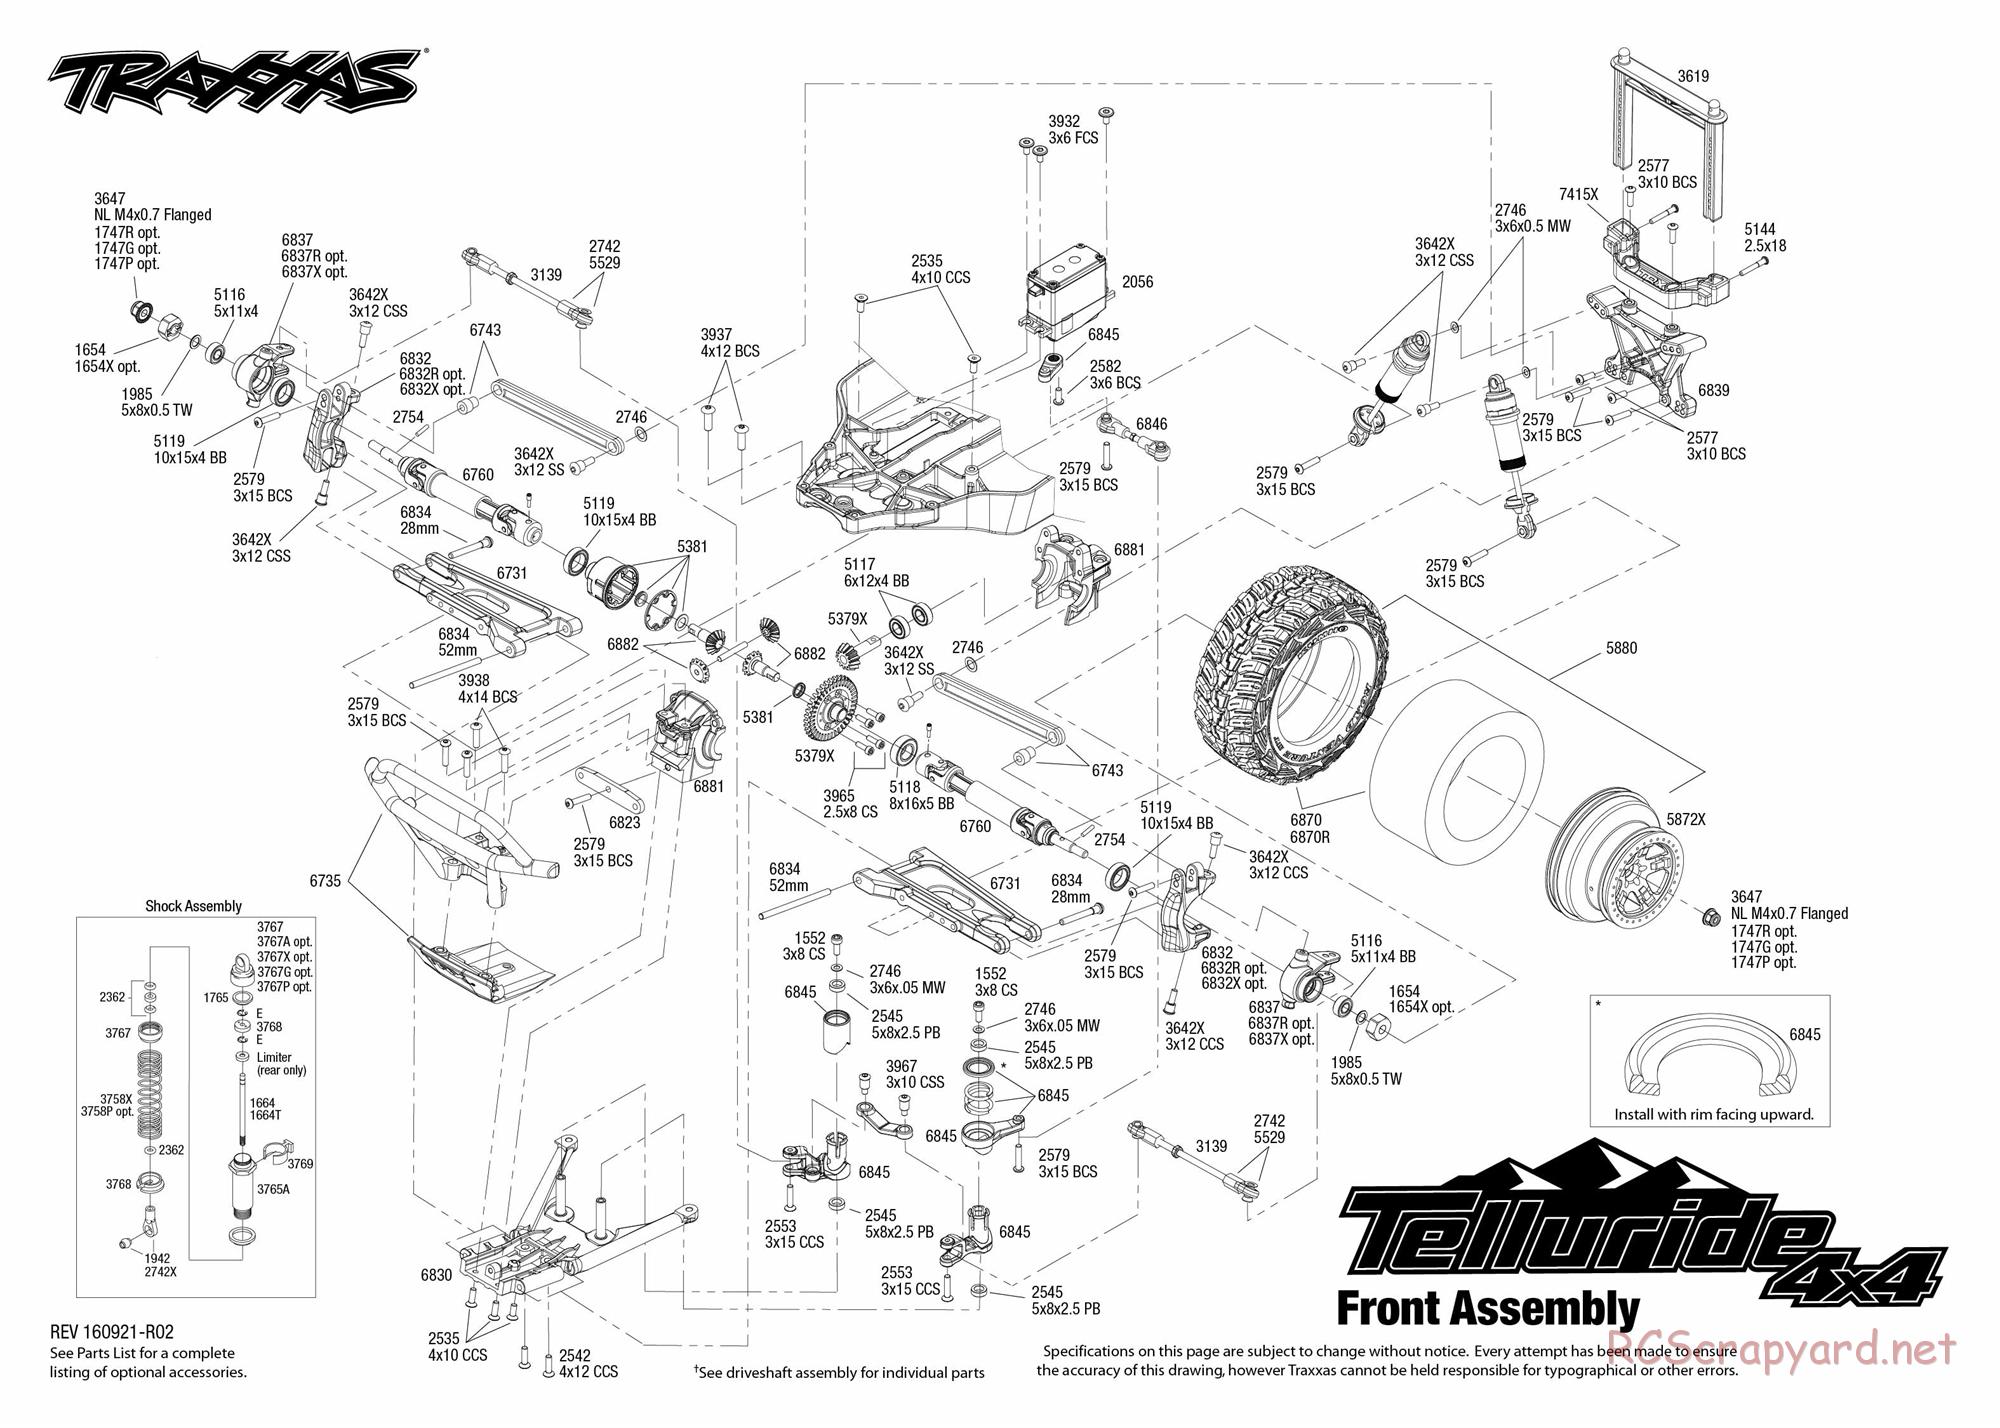 Traxxas - Telluride 4x4 (2015) - Exploded Views - Page 3